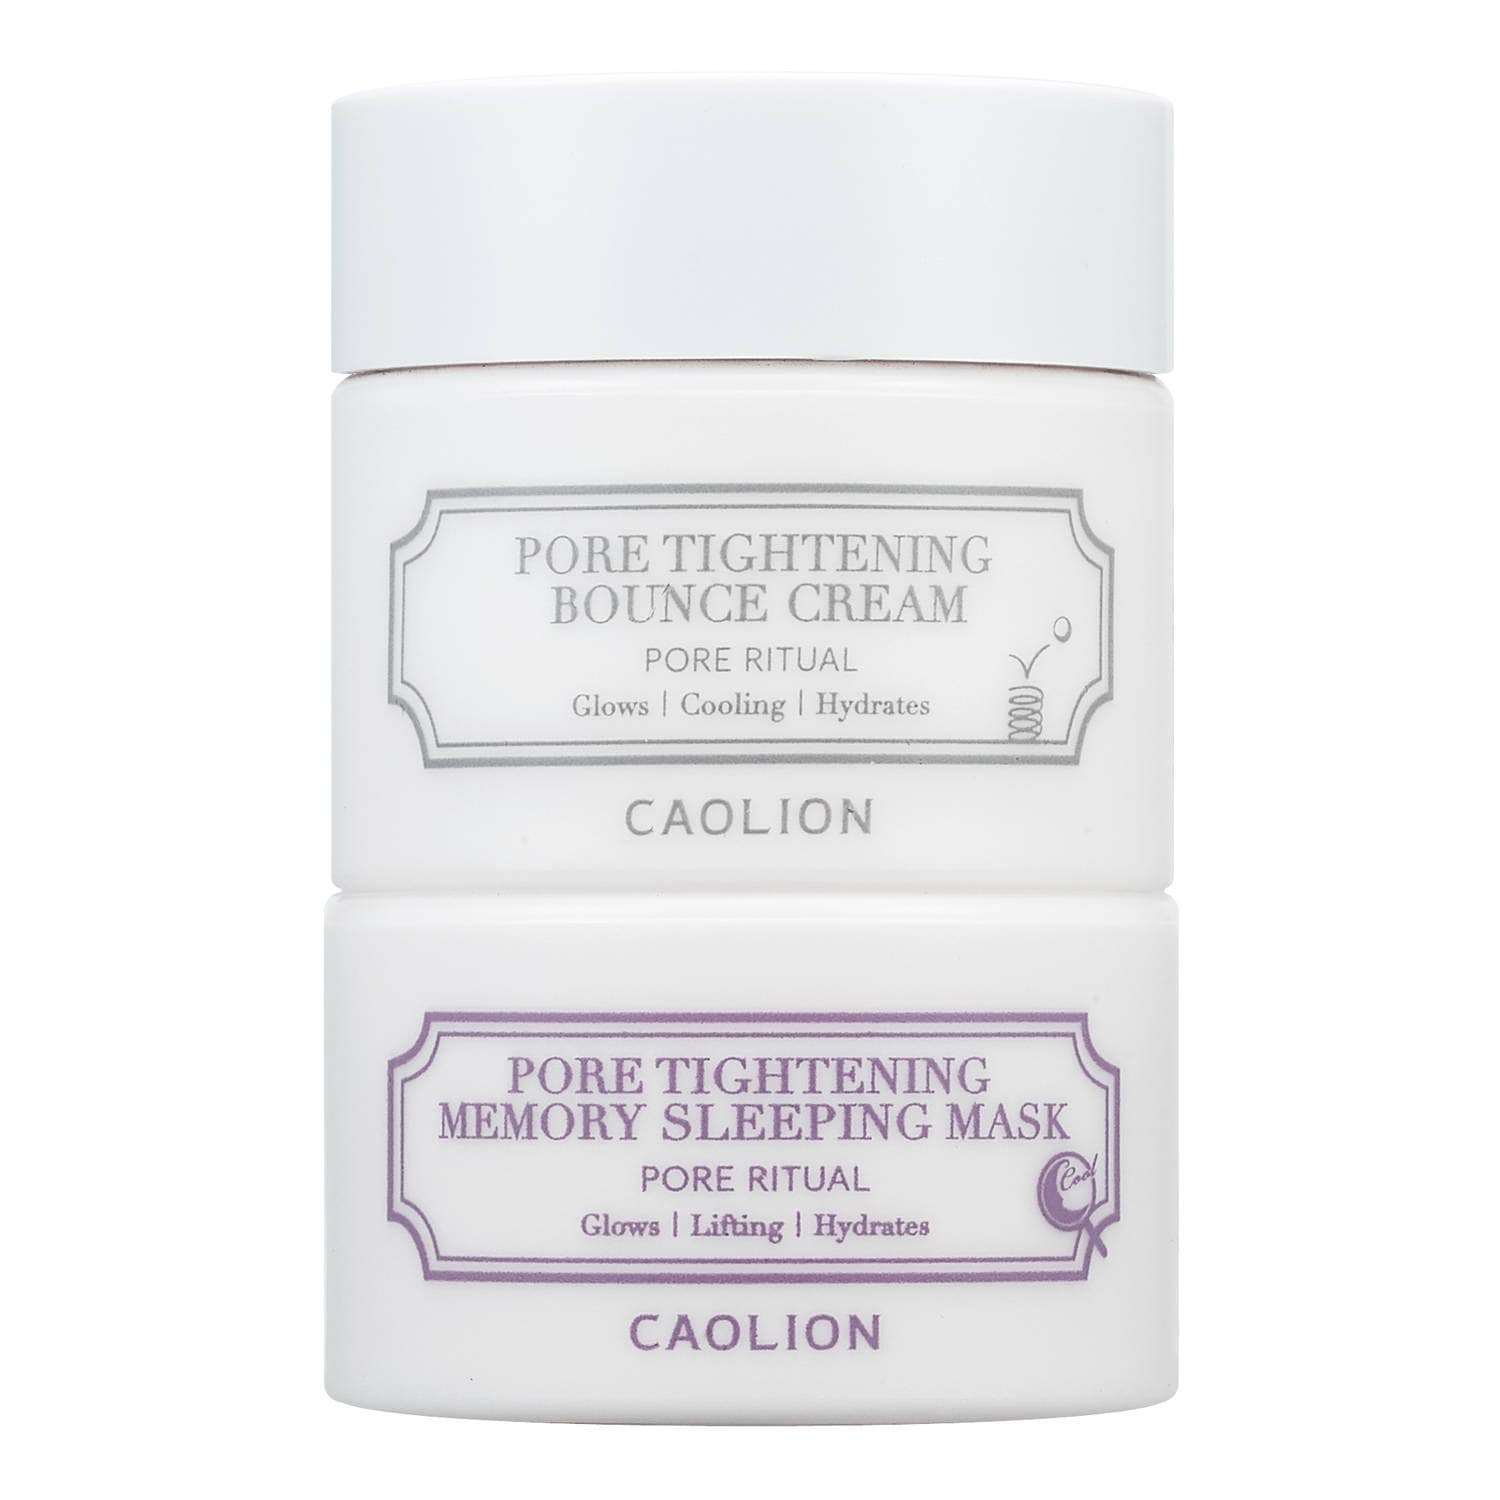 caolion pore tightening day & night glowing duo review